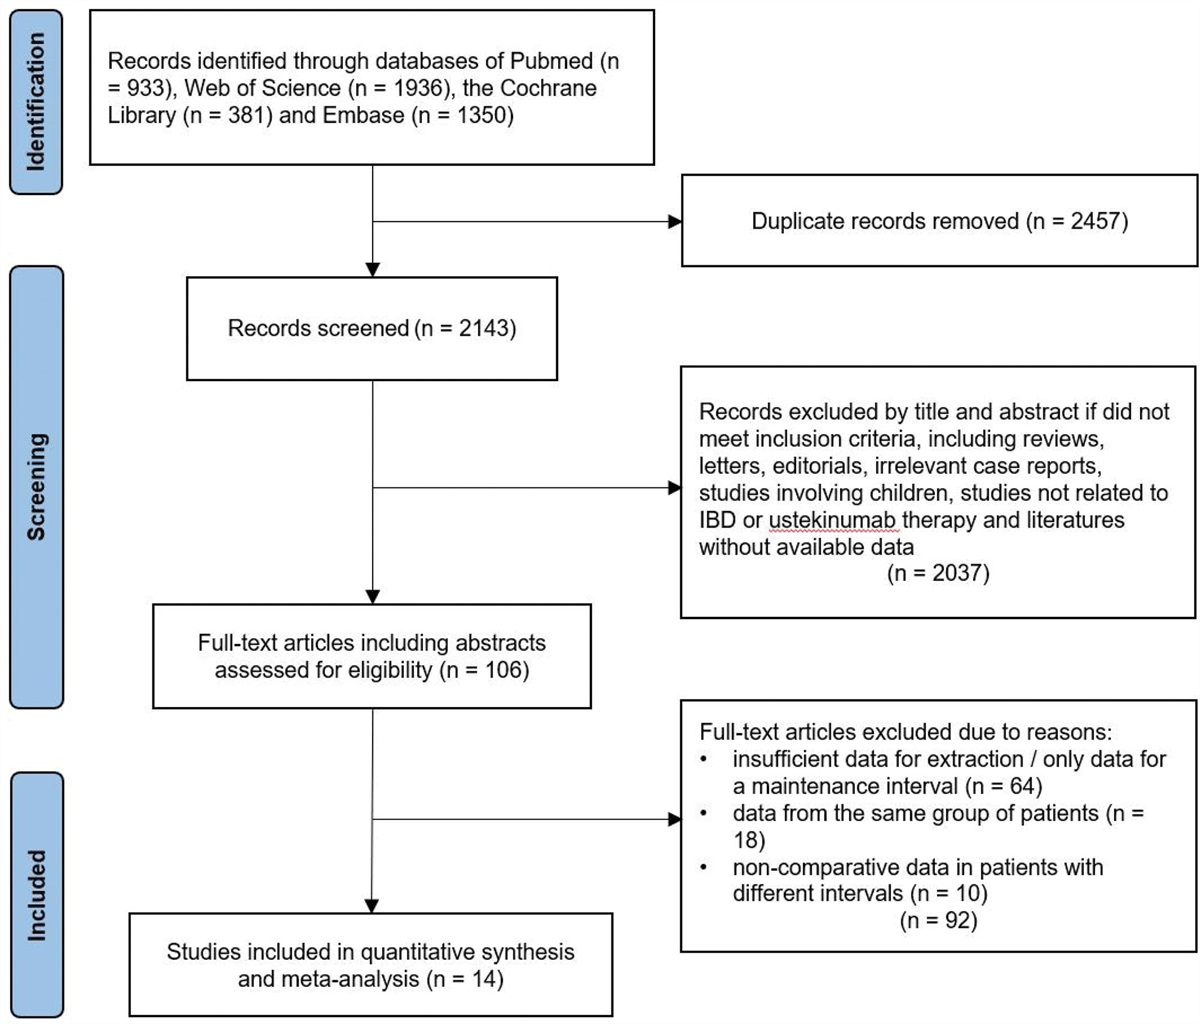 Comparative effectiveness and safety of ustekinumab at different intervals of maintenance phase in inflammatory bowel disease: a systematic review and meta-analysis